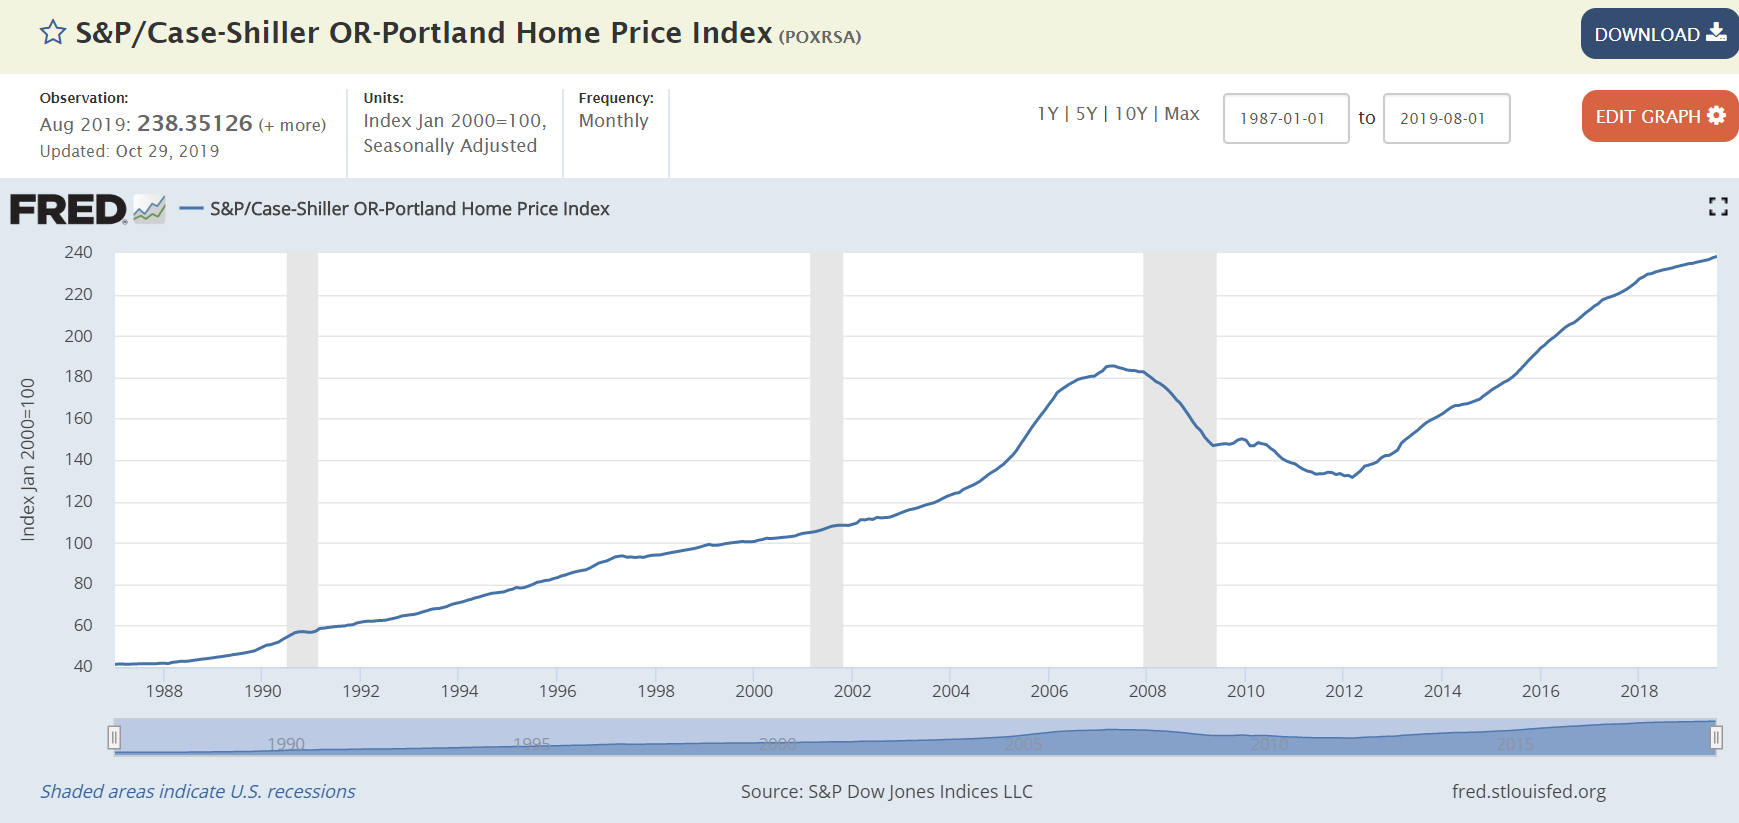 FRED S&P/Case-Shiller OR-Portland Home Price Index